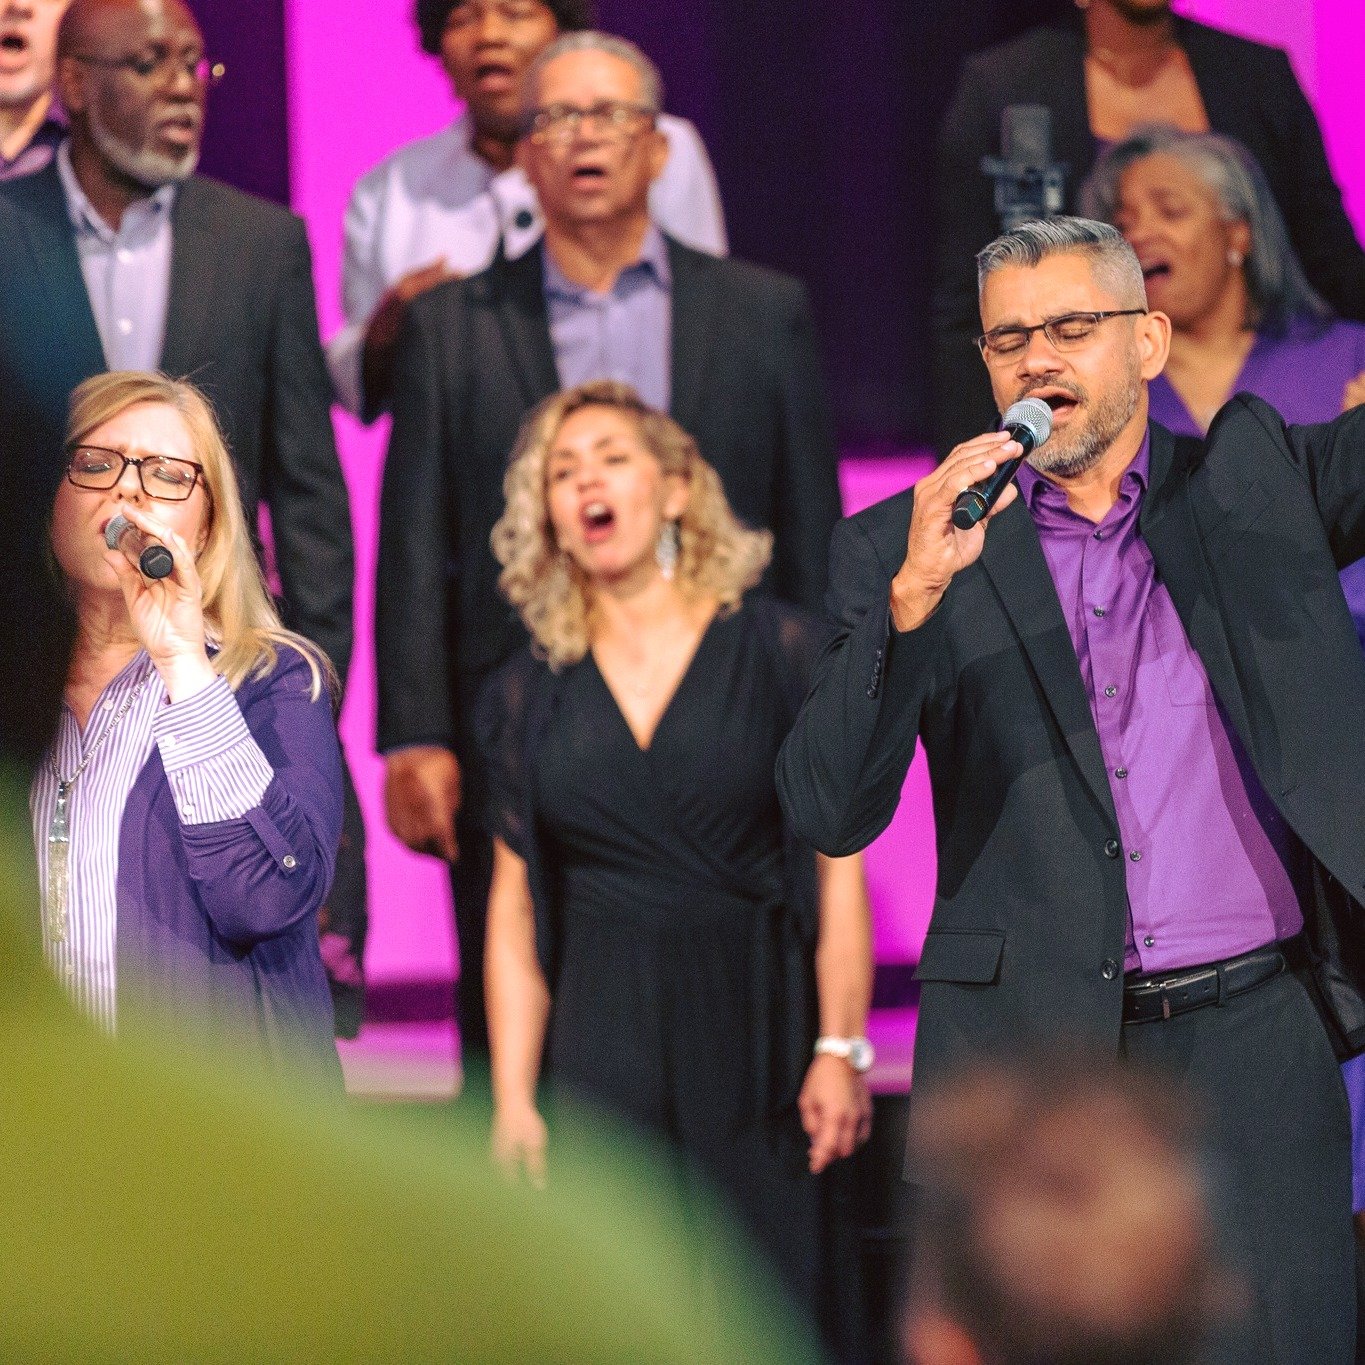 What an amazing time of worship this past Sunday. Can't wait to worship together again this weekend!